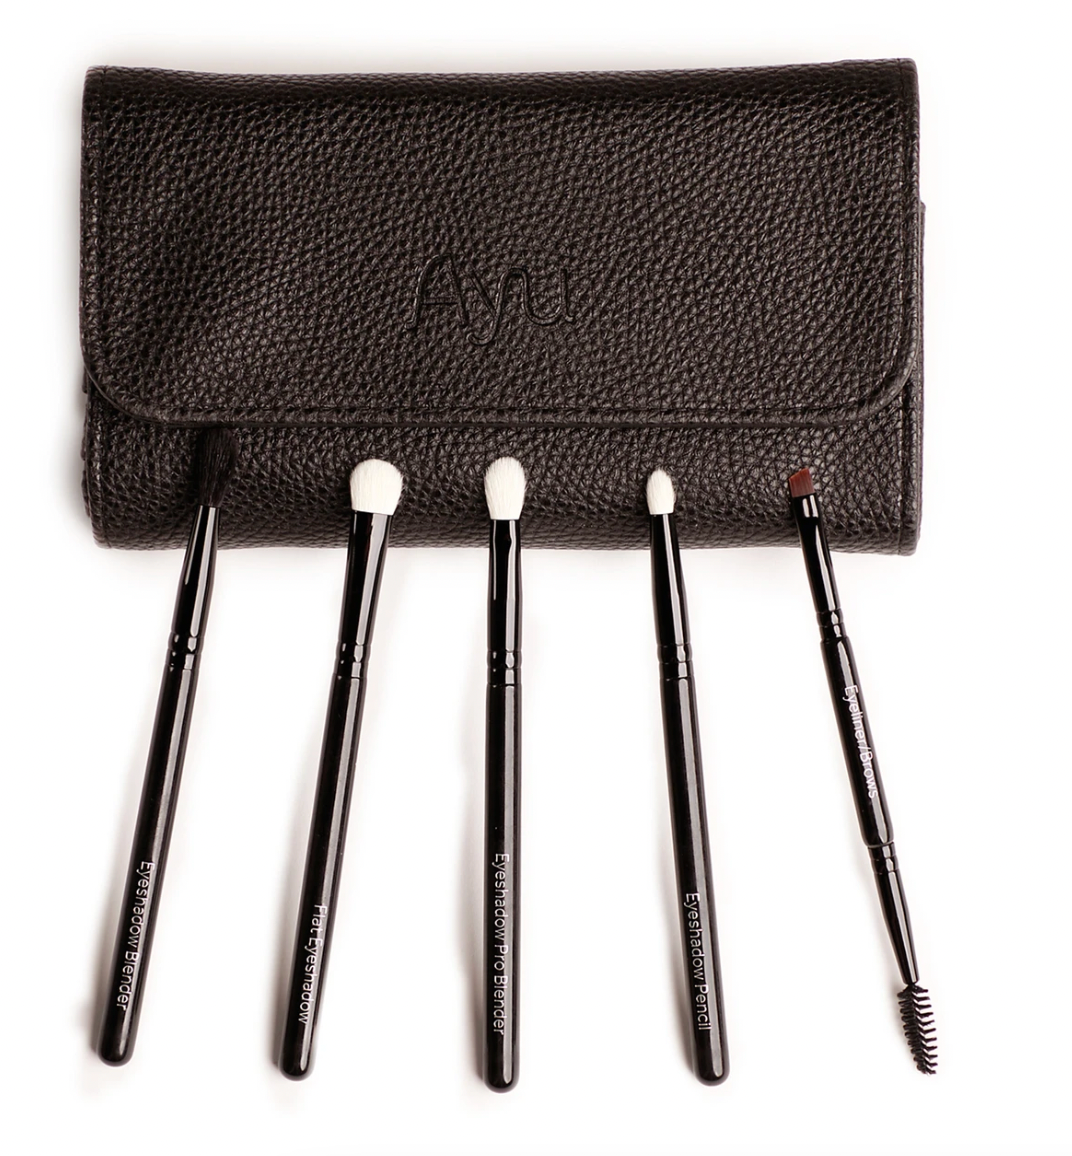 Ayu It's all in the eyes Brush Set